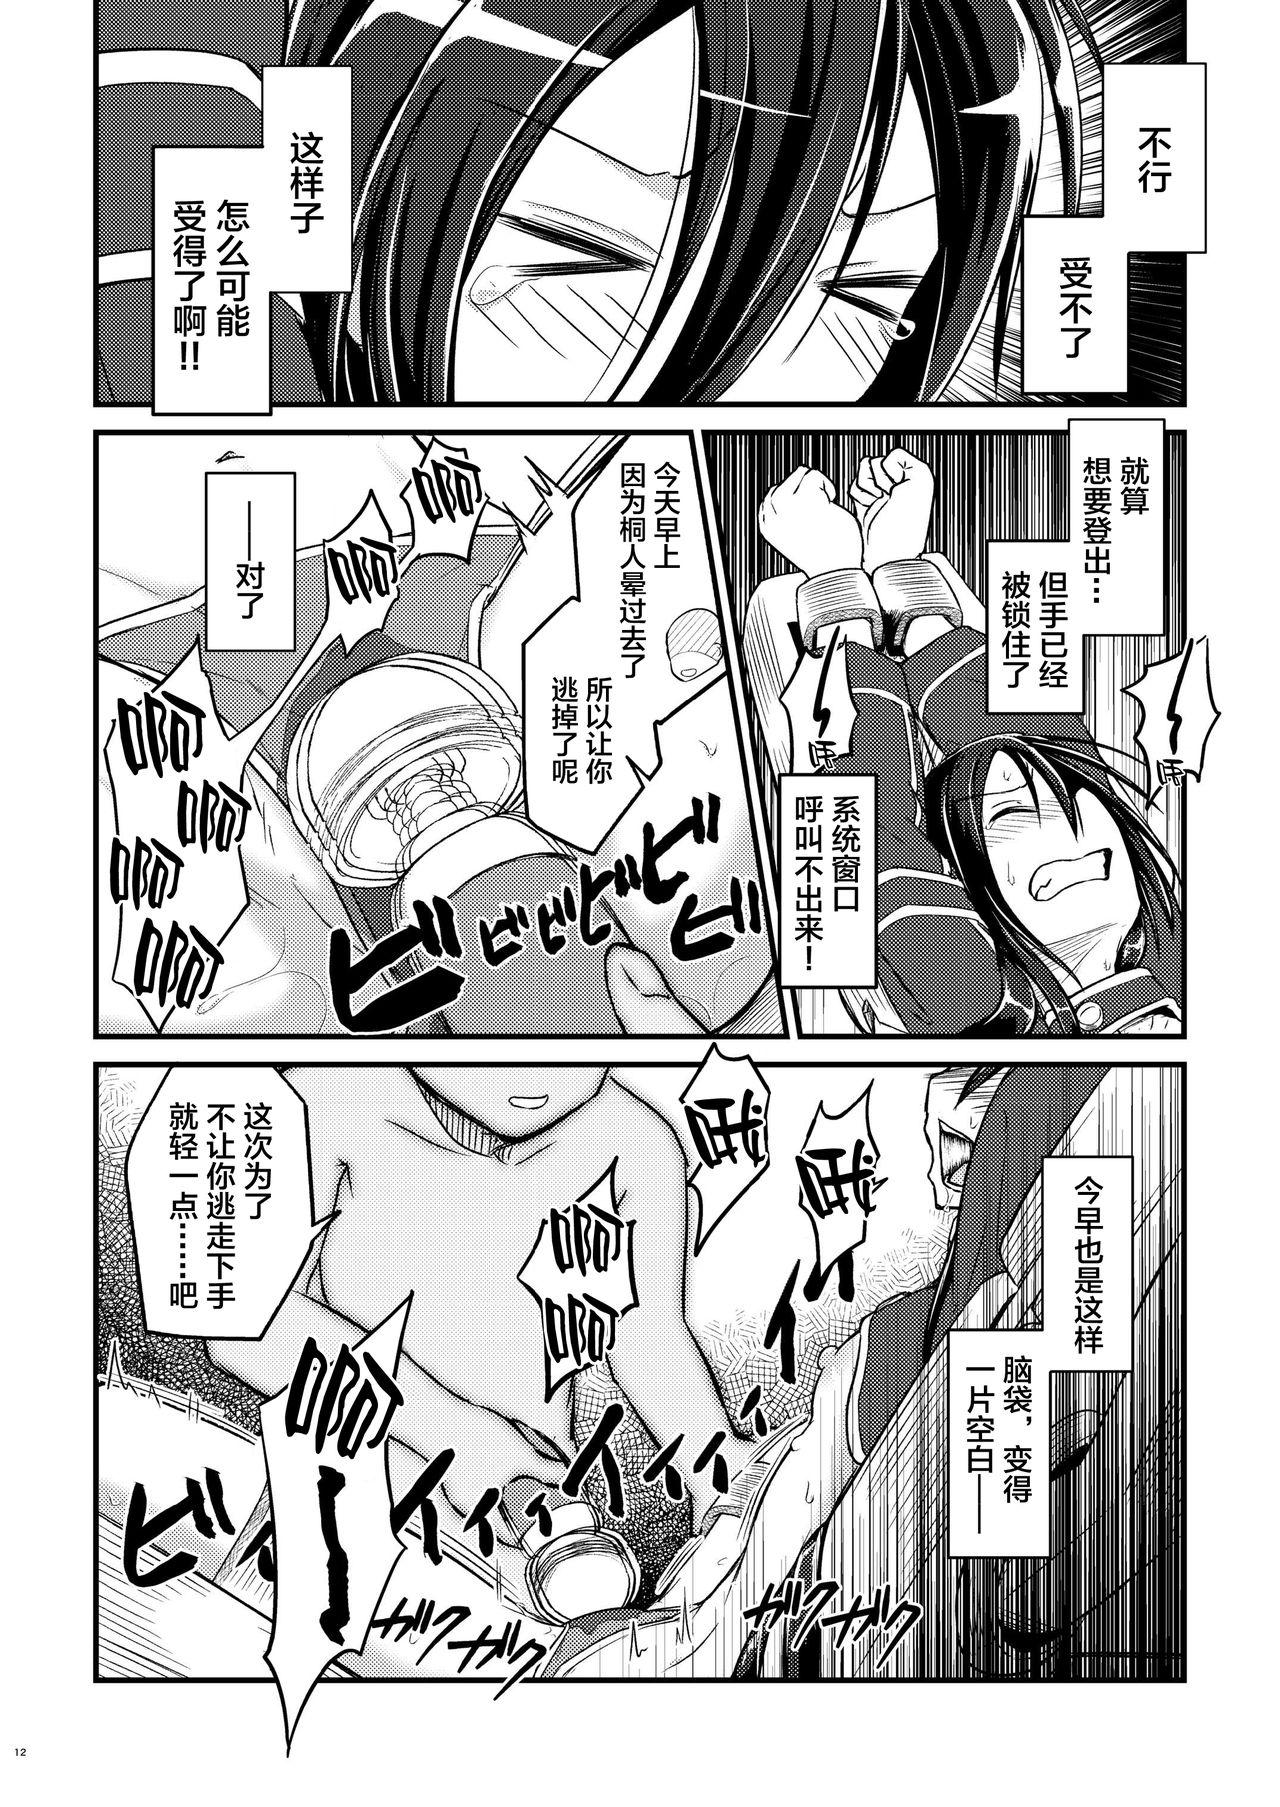 Webcamchat Kiriko Route Another A Part Set - Sword art online Strapon - Page 11